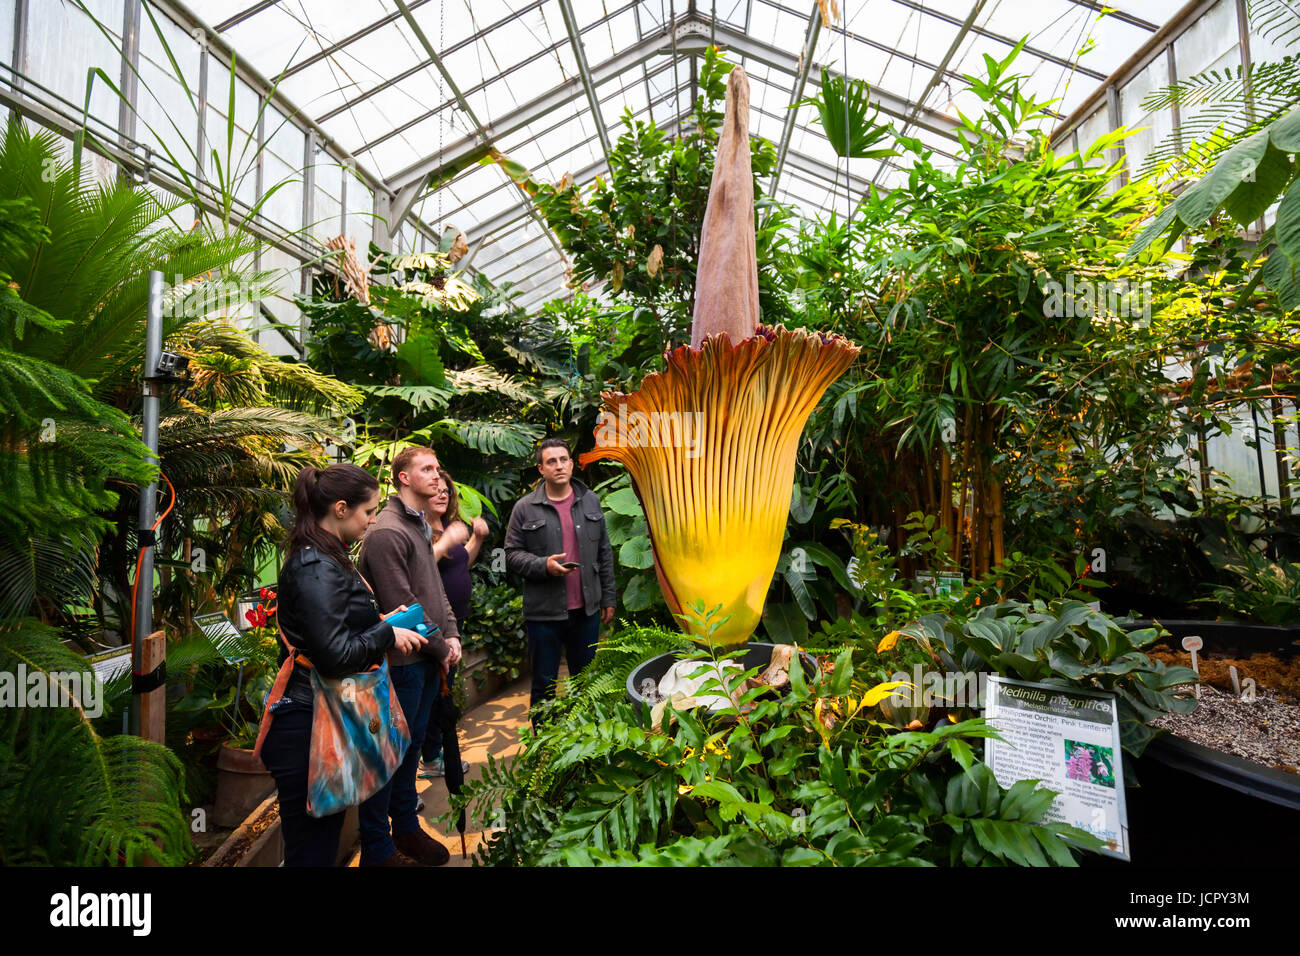 People viewing a titan arum or Amorphophallus titanum in full bloom. It is a flowering plant or carrion flower that is native to Western Sumatra. Stock Photo